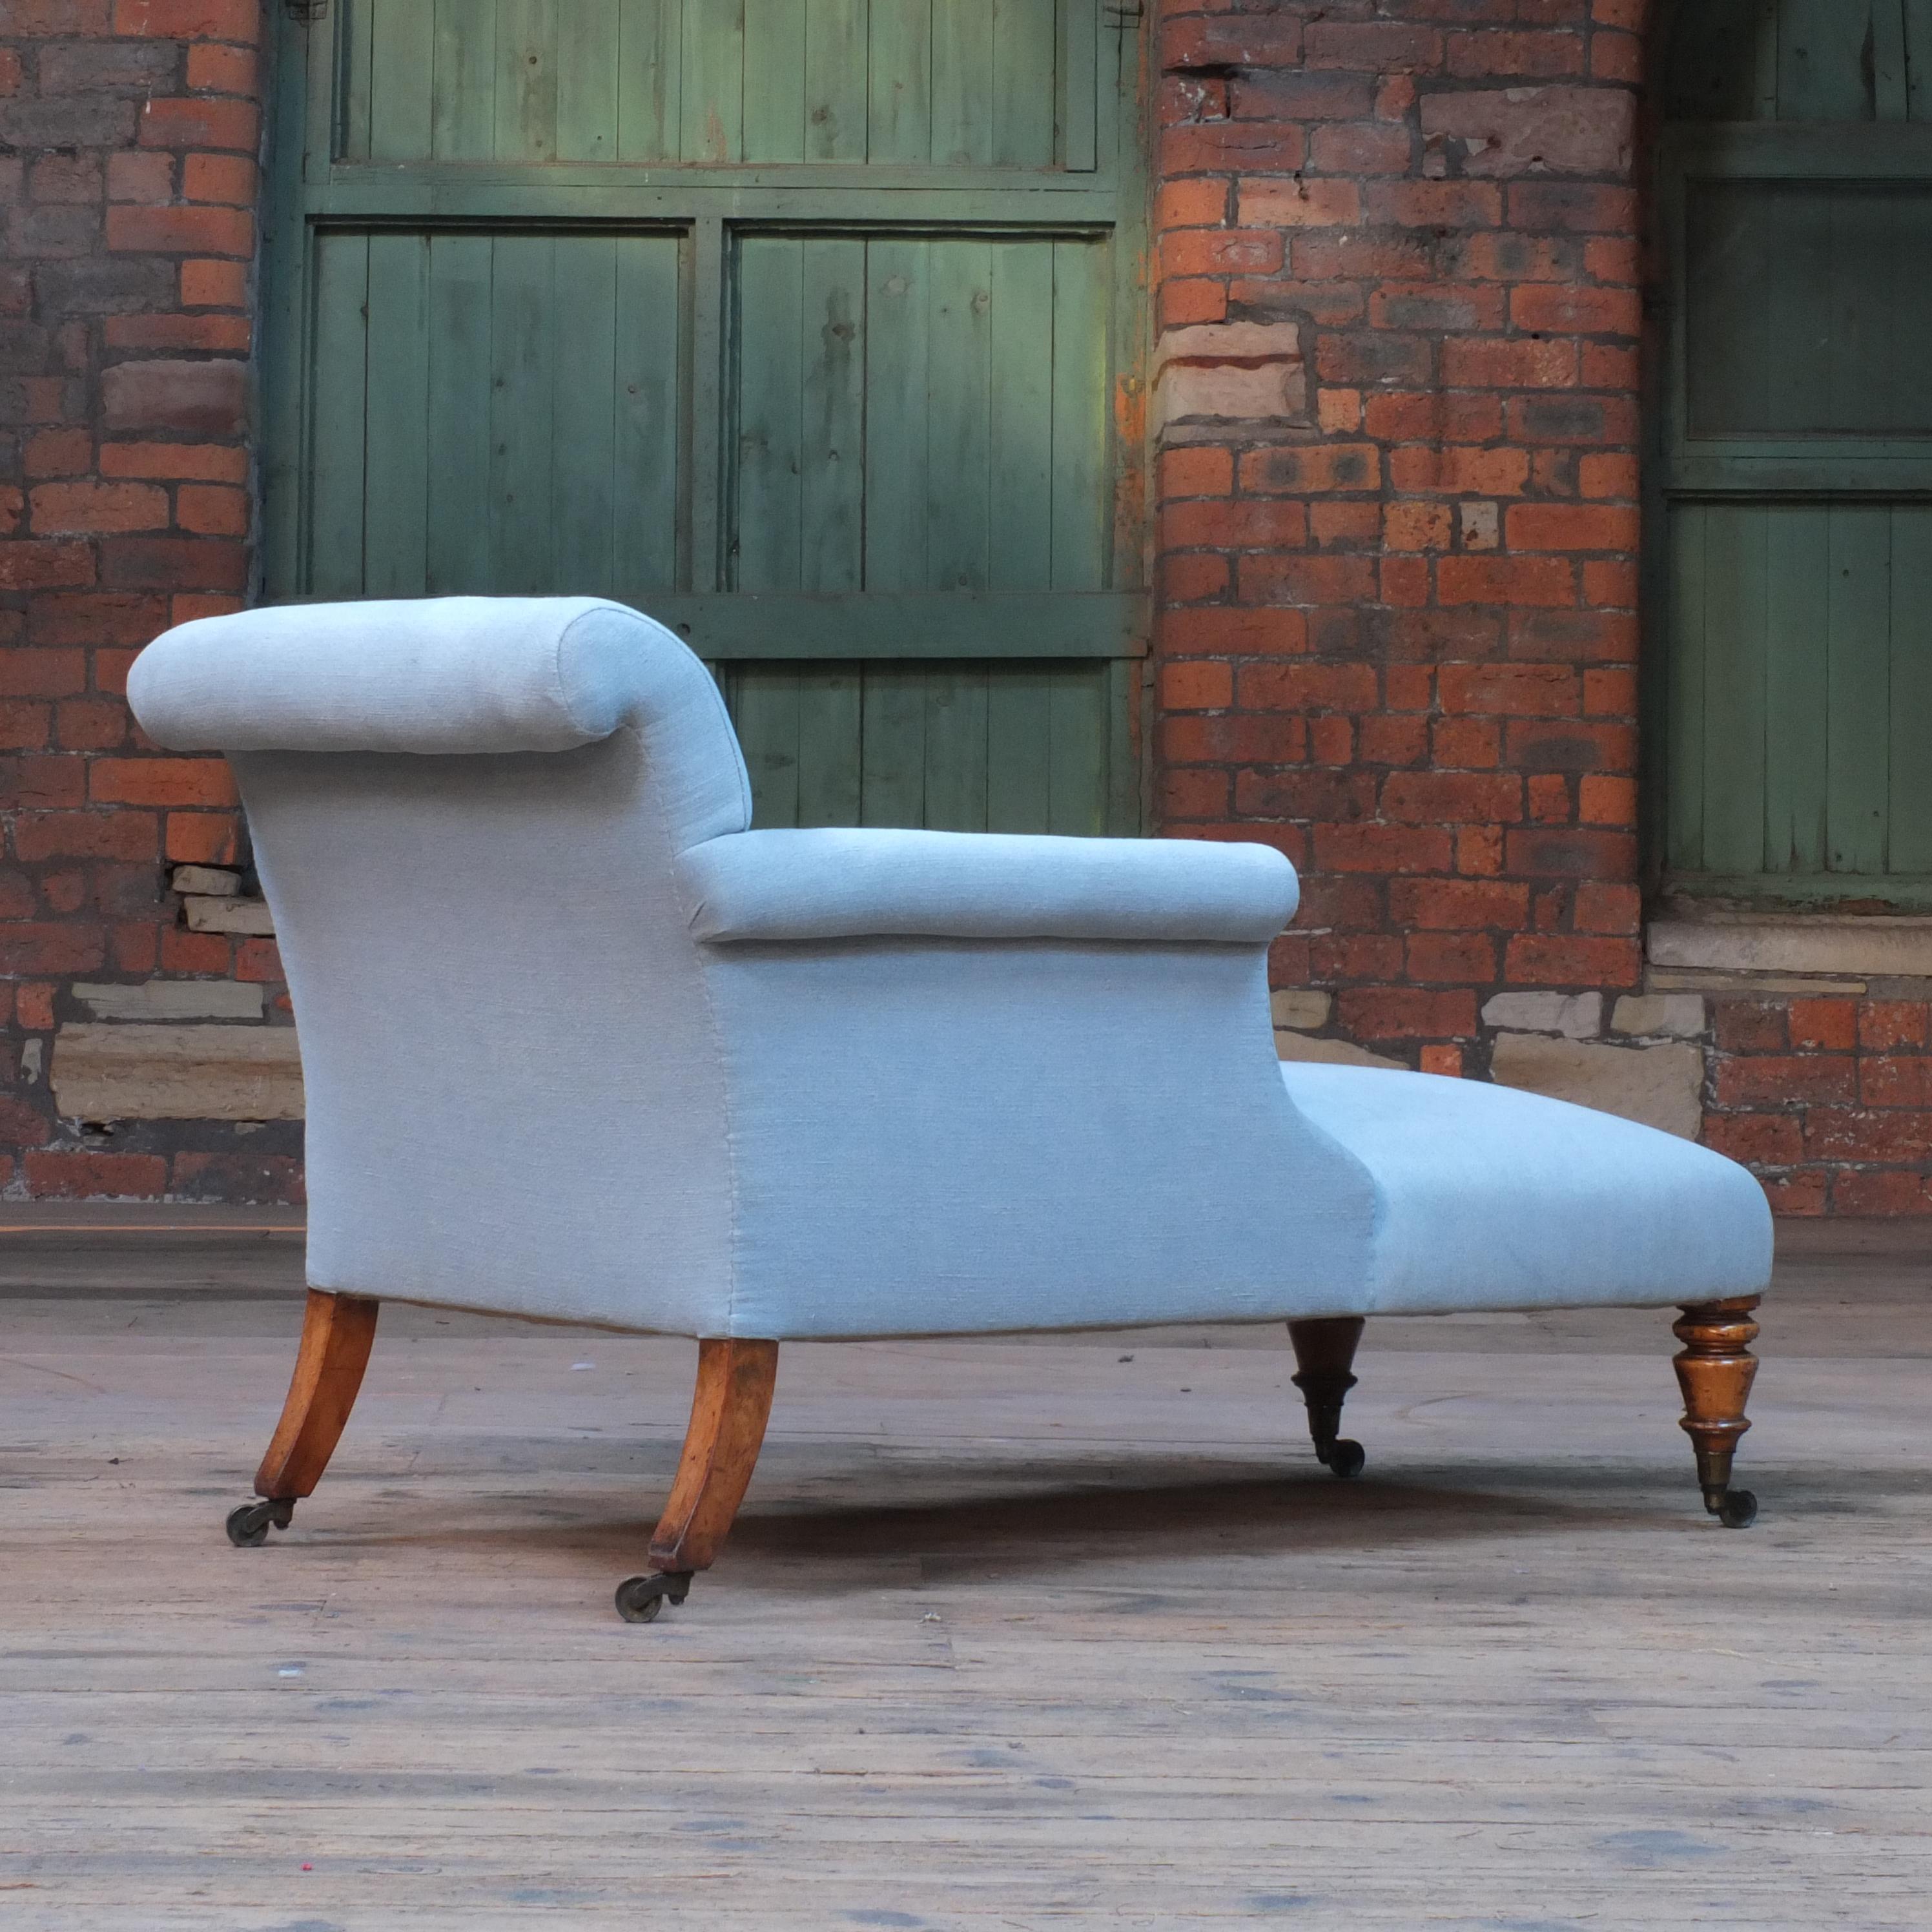 English Early 19th Century Chaise Lounge by Charles Hindley & Sons